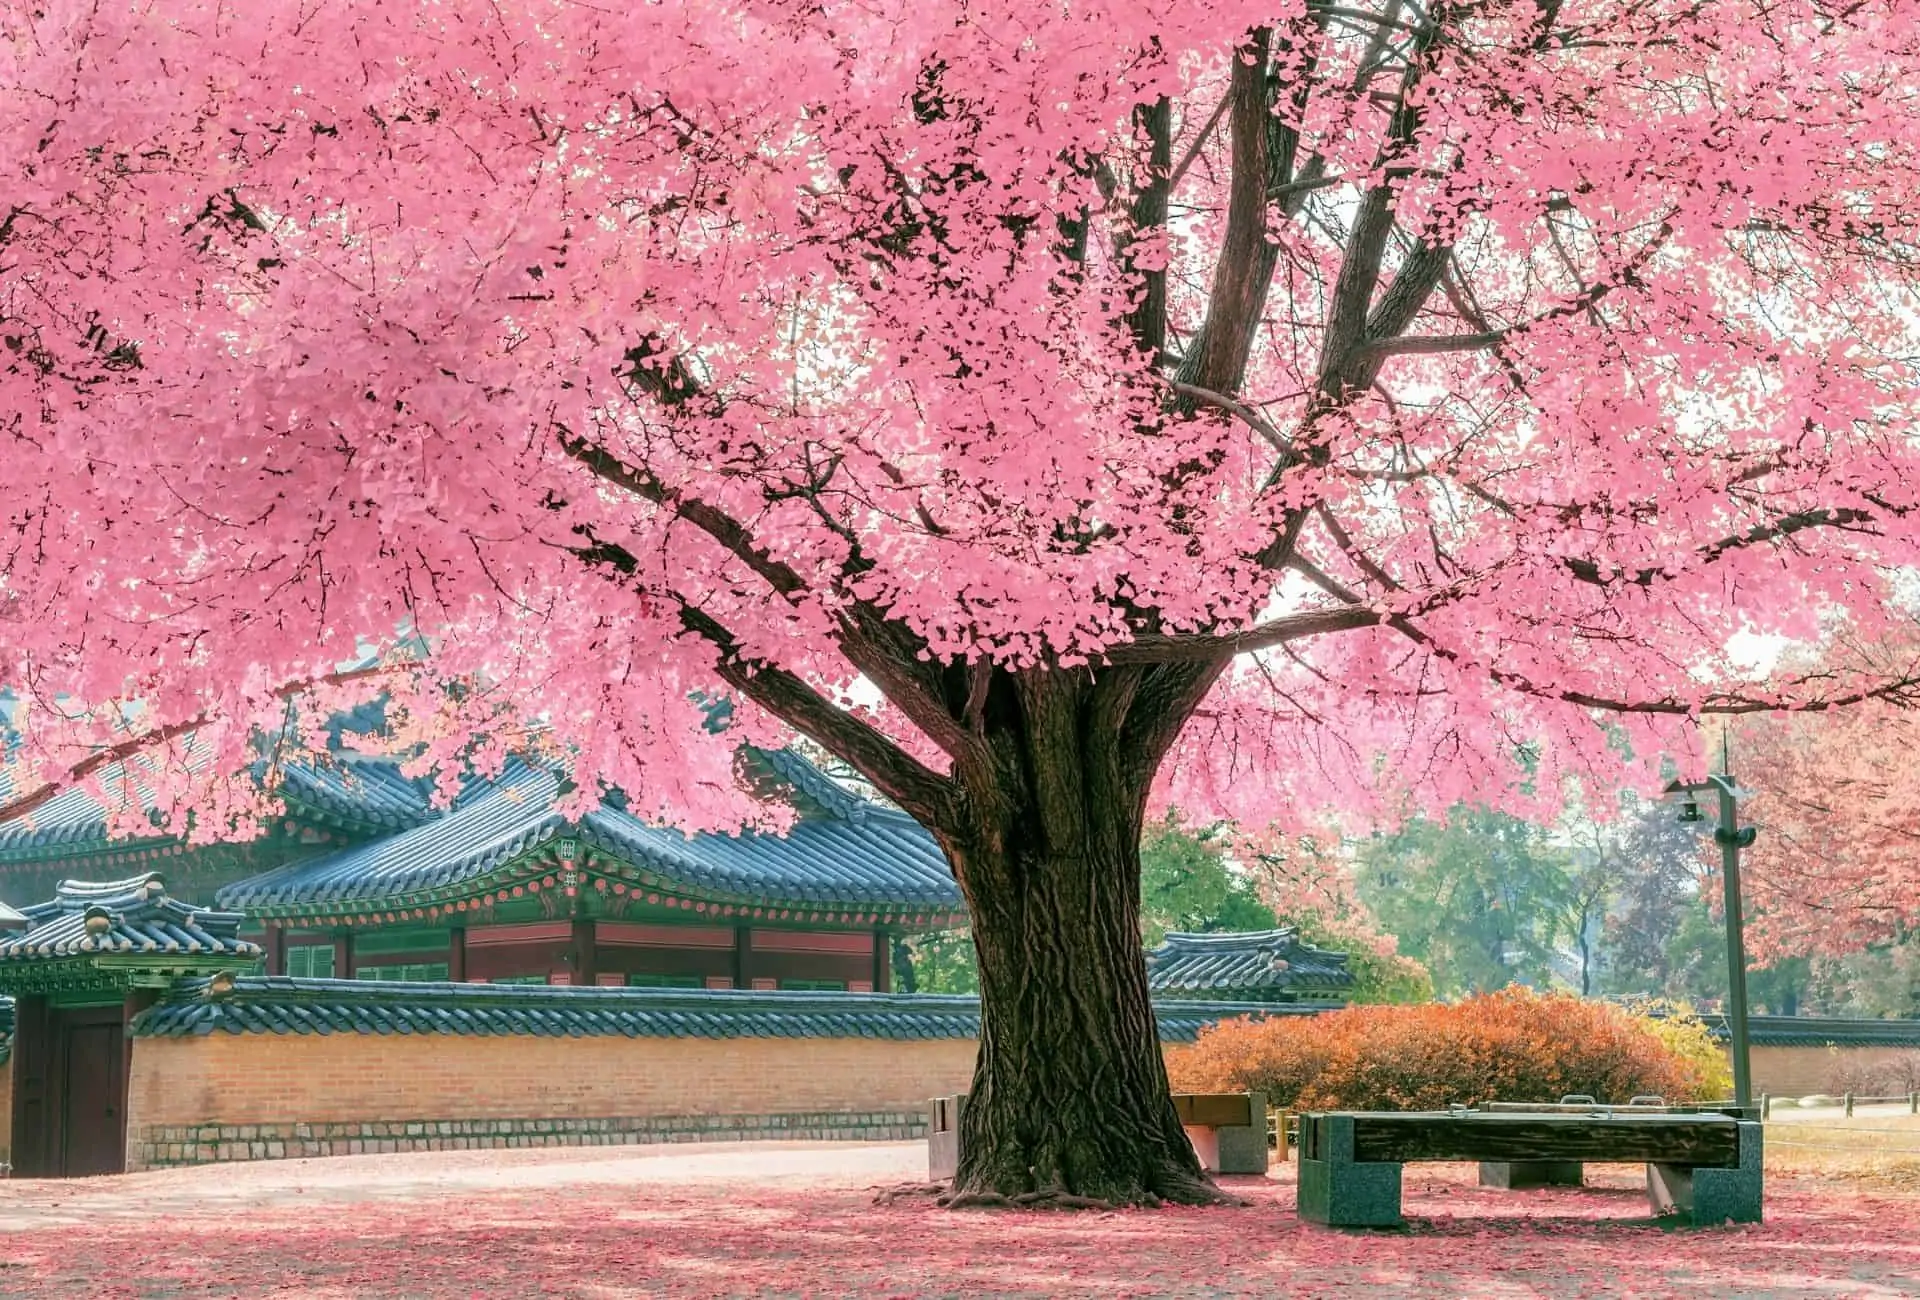 Pink cherry blossom tree in Japan.